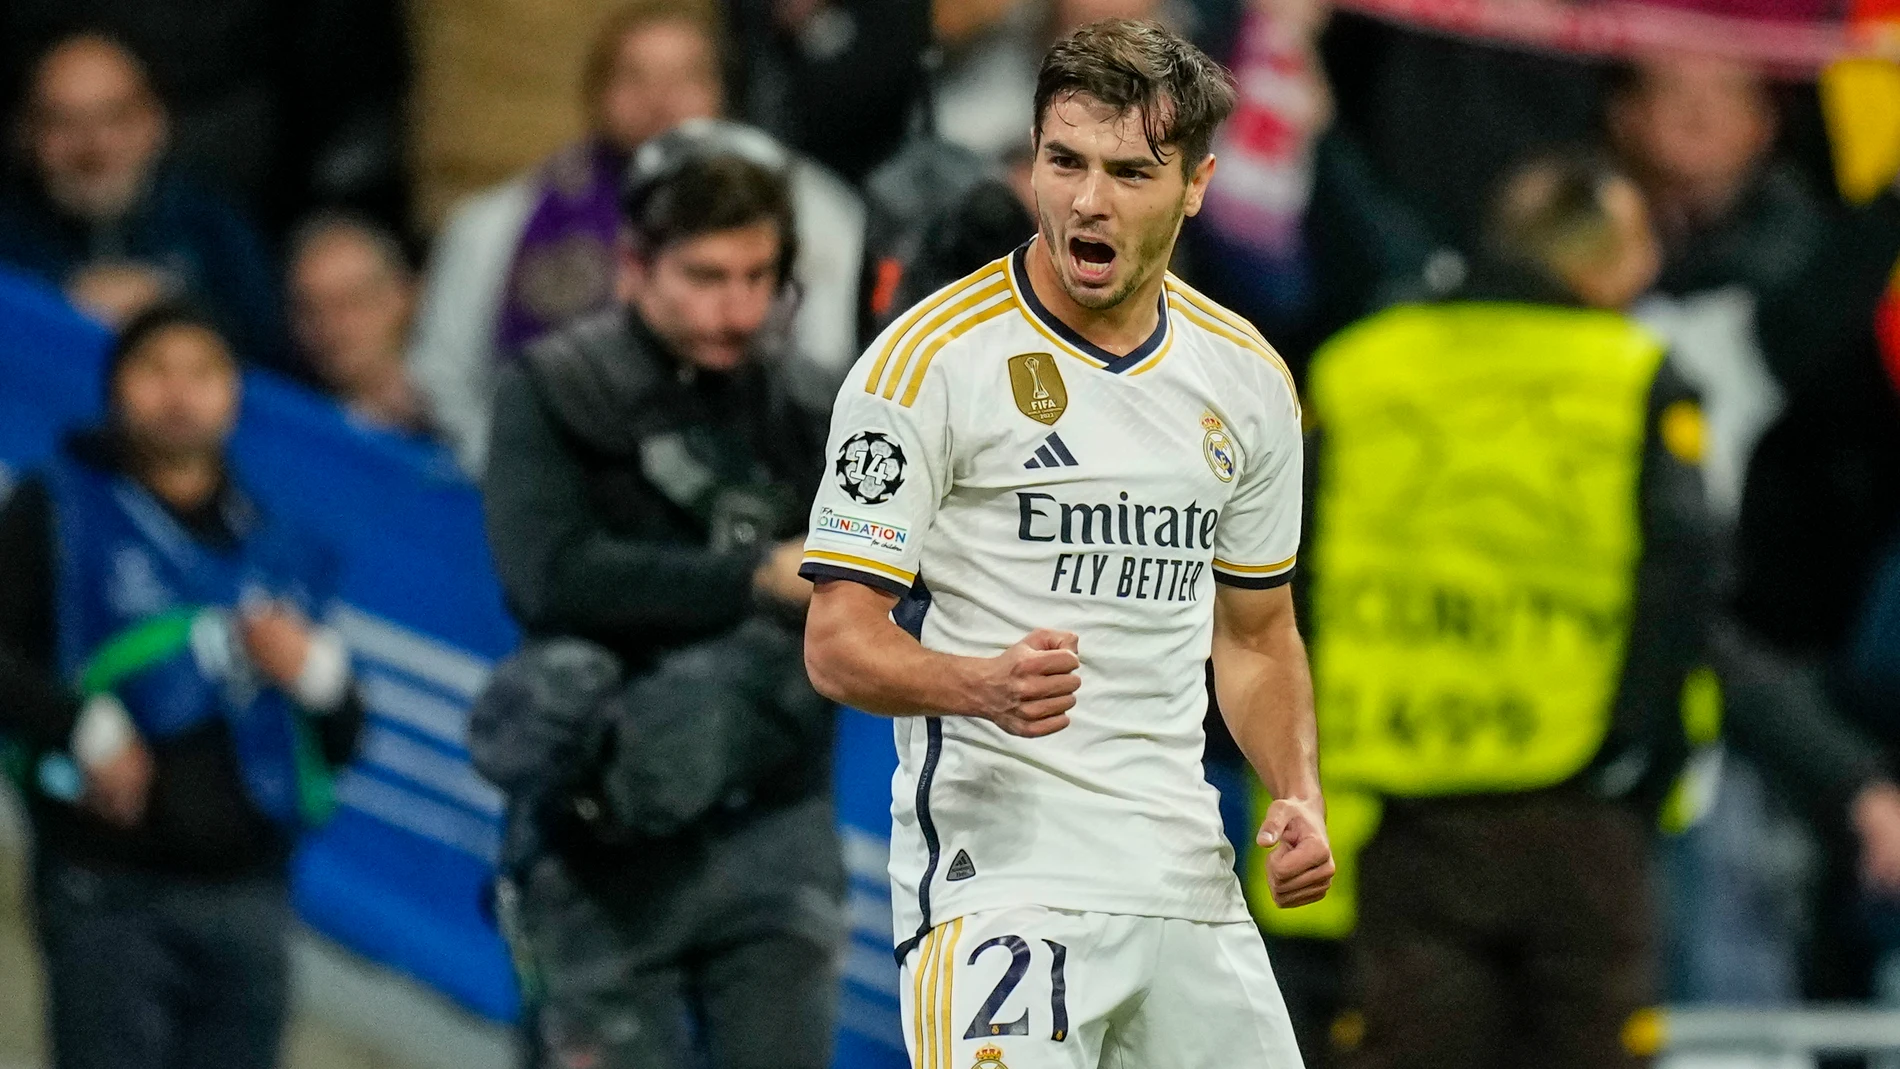 Real Madrid's Brahim Diaz celebrates after scoring his side's opening goal during the Champions League Group C soccer match between Real Madrid and Braga at the Santiago Bernabeu stadium in Madrid, Spain, Wednesday, Nov. 8, 2023. (AP Photo/Jose Breton)